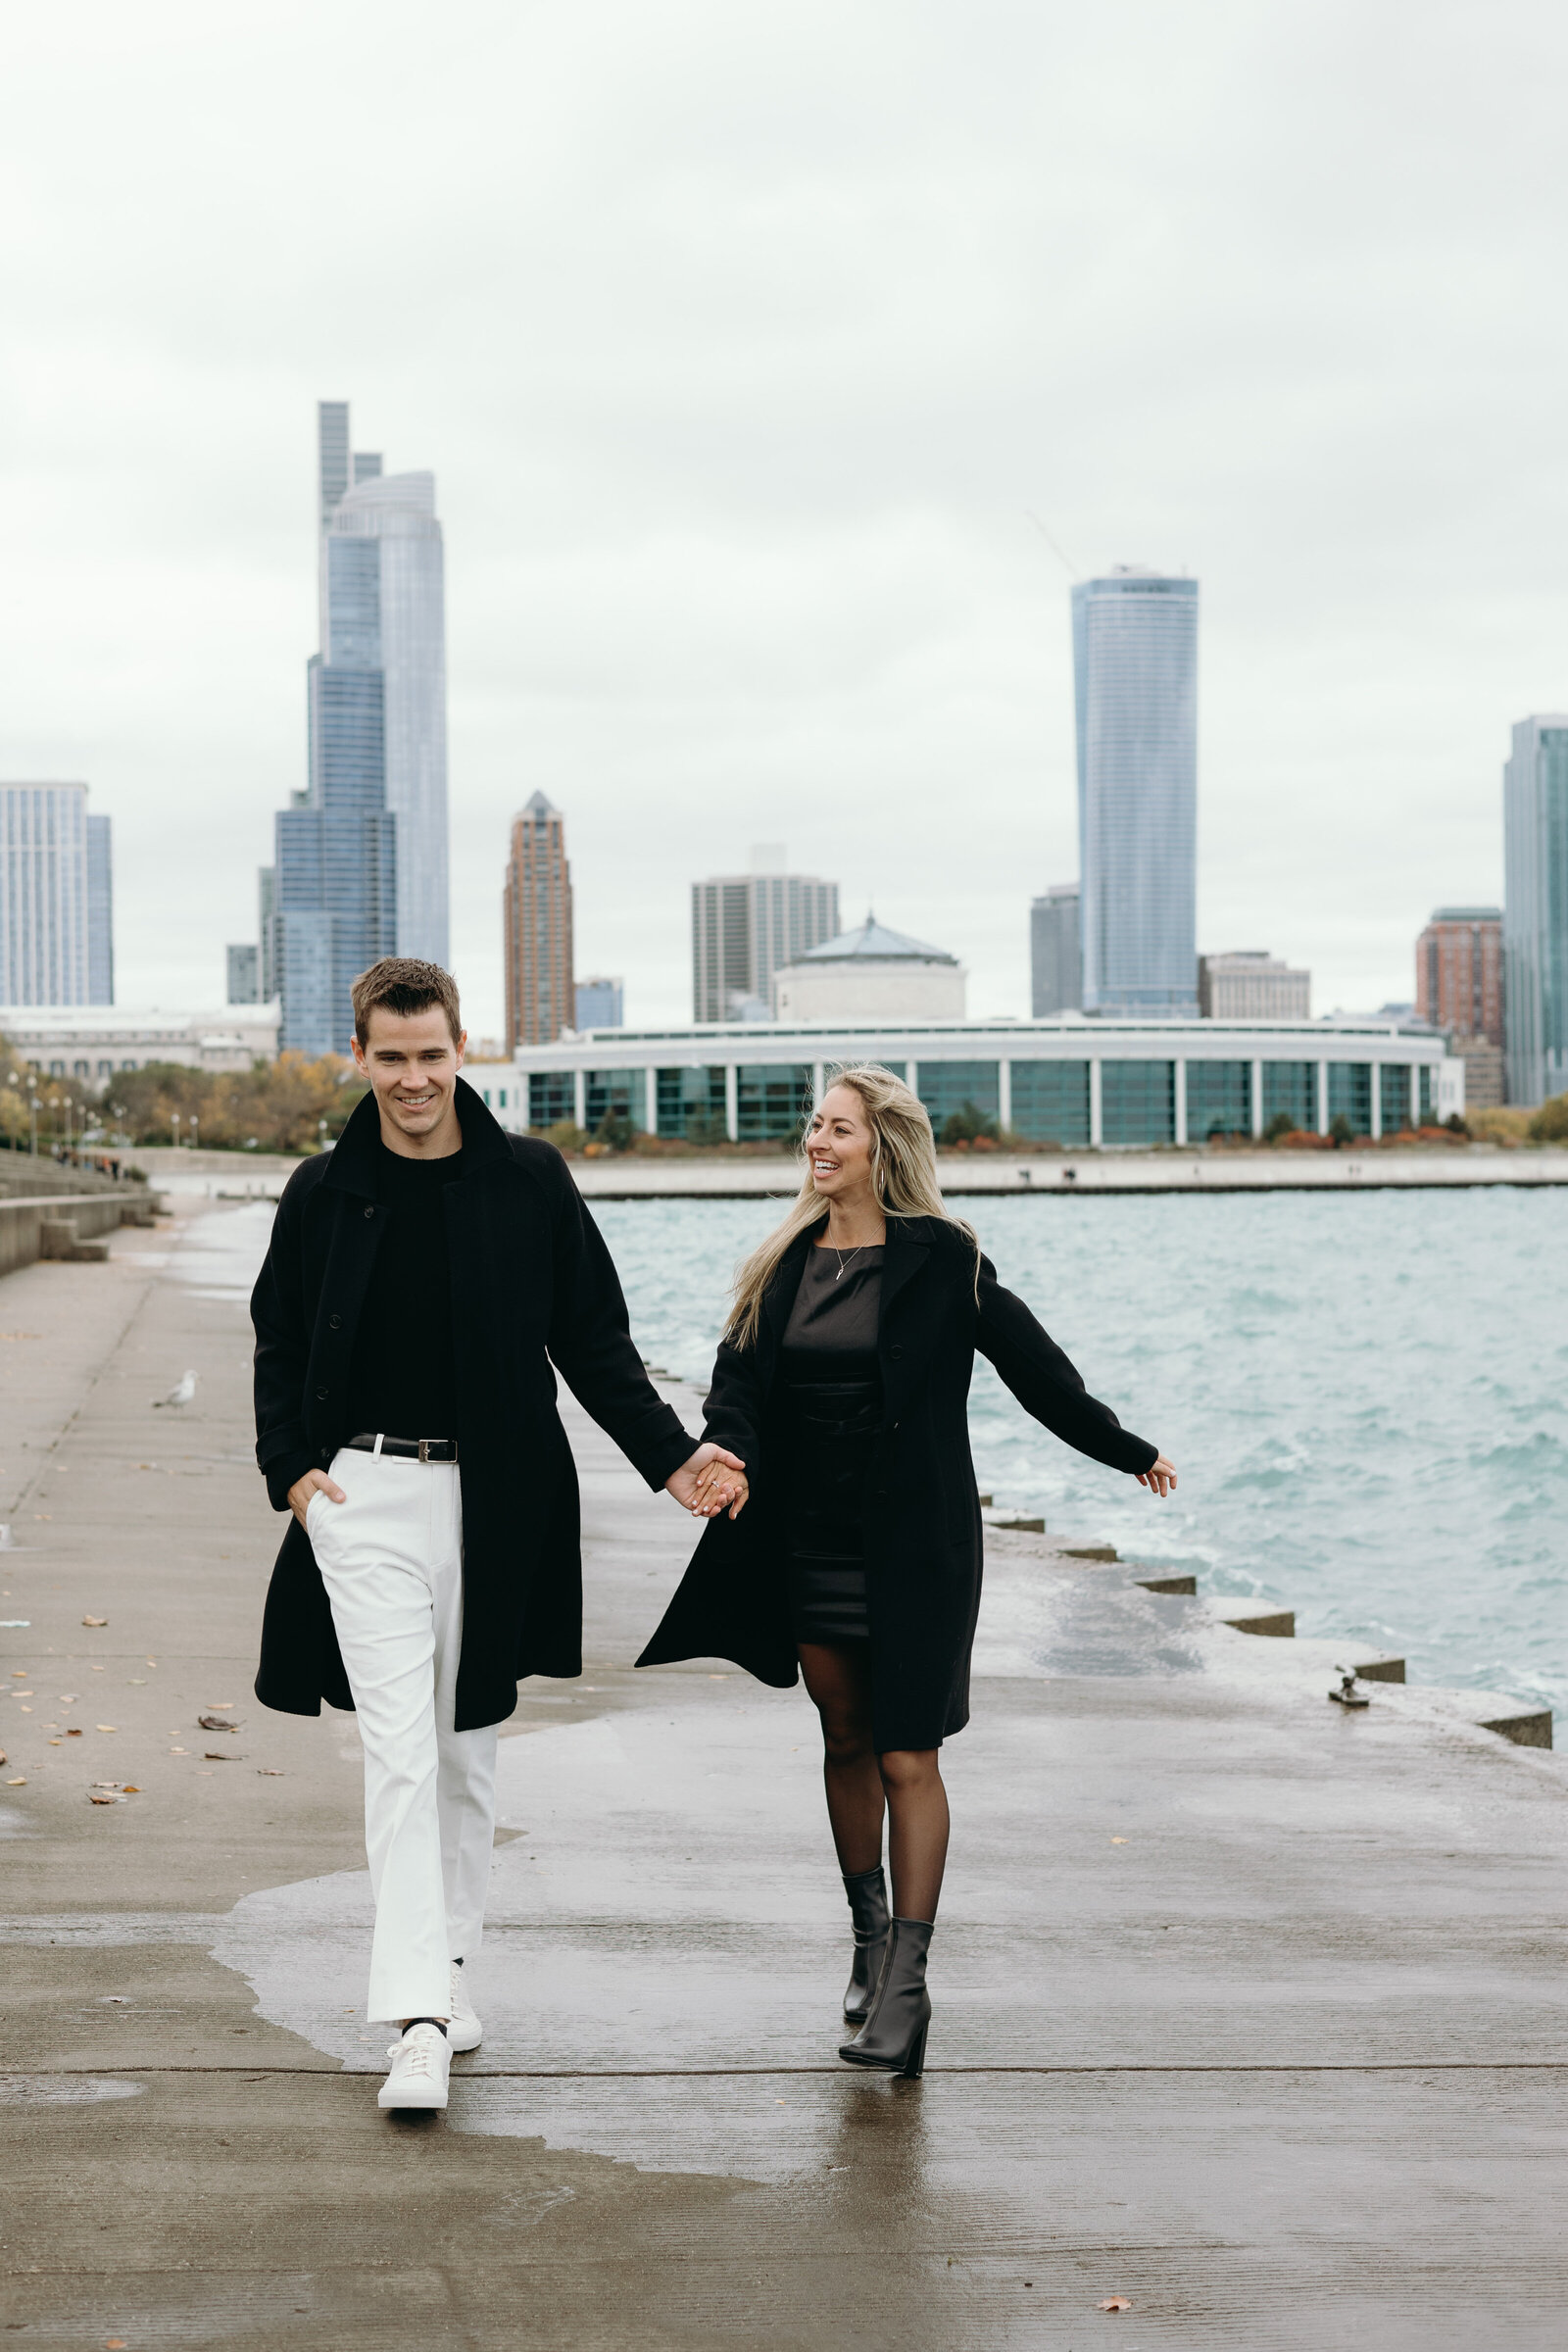 Z Photo and Film - Cody and Silvana's Chicago Engagement Shoot - Chicago, Illinois-4